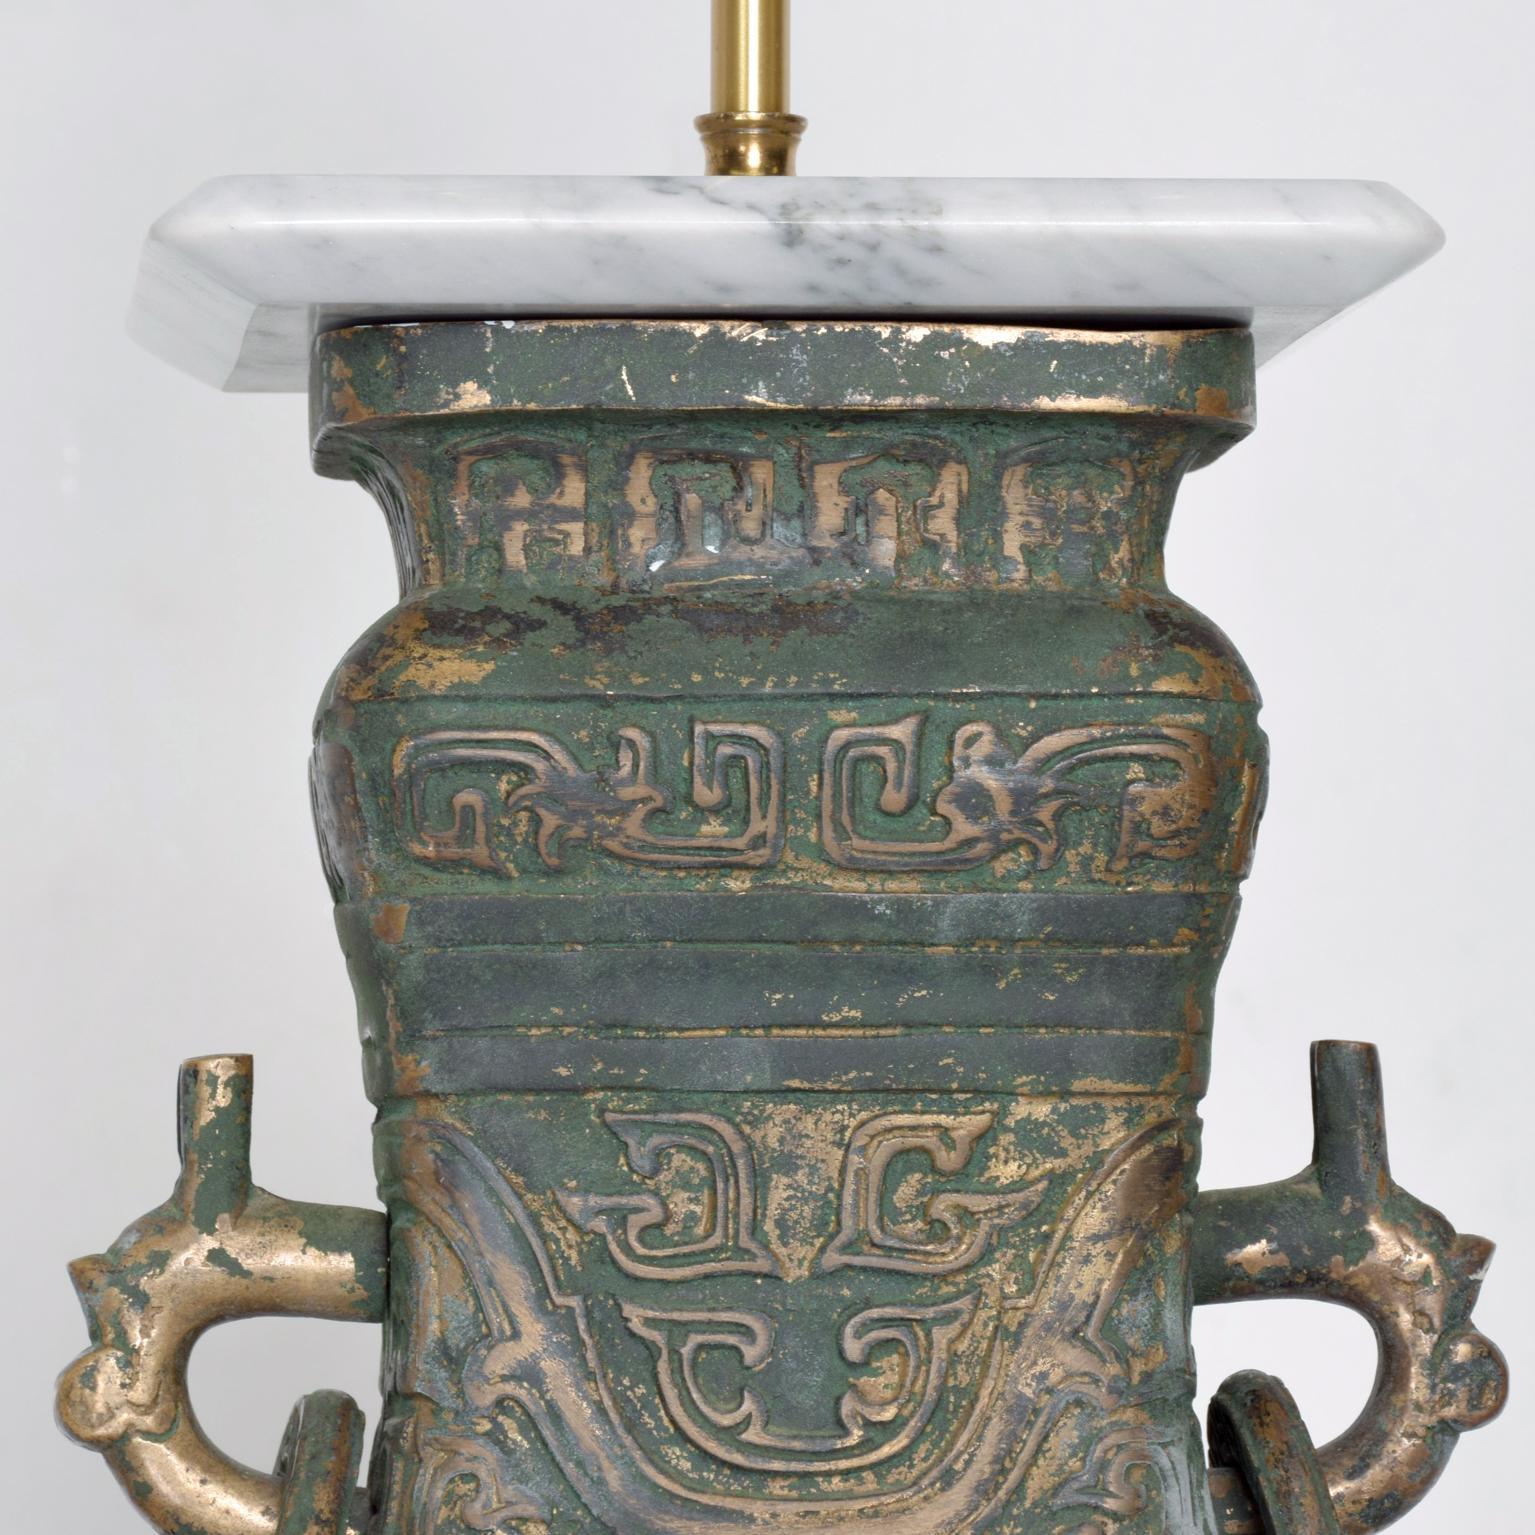 For your consideration: an elegant Asian table lamp in bronze. Unmarked. Attributed to James Mont. 

Dimensions are: 30 1/2